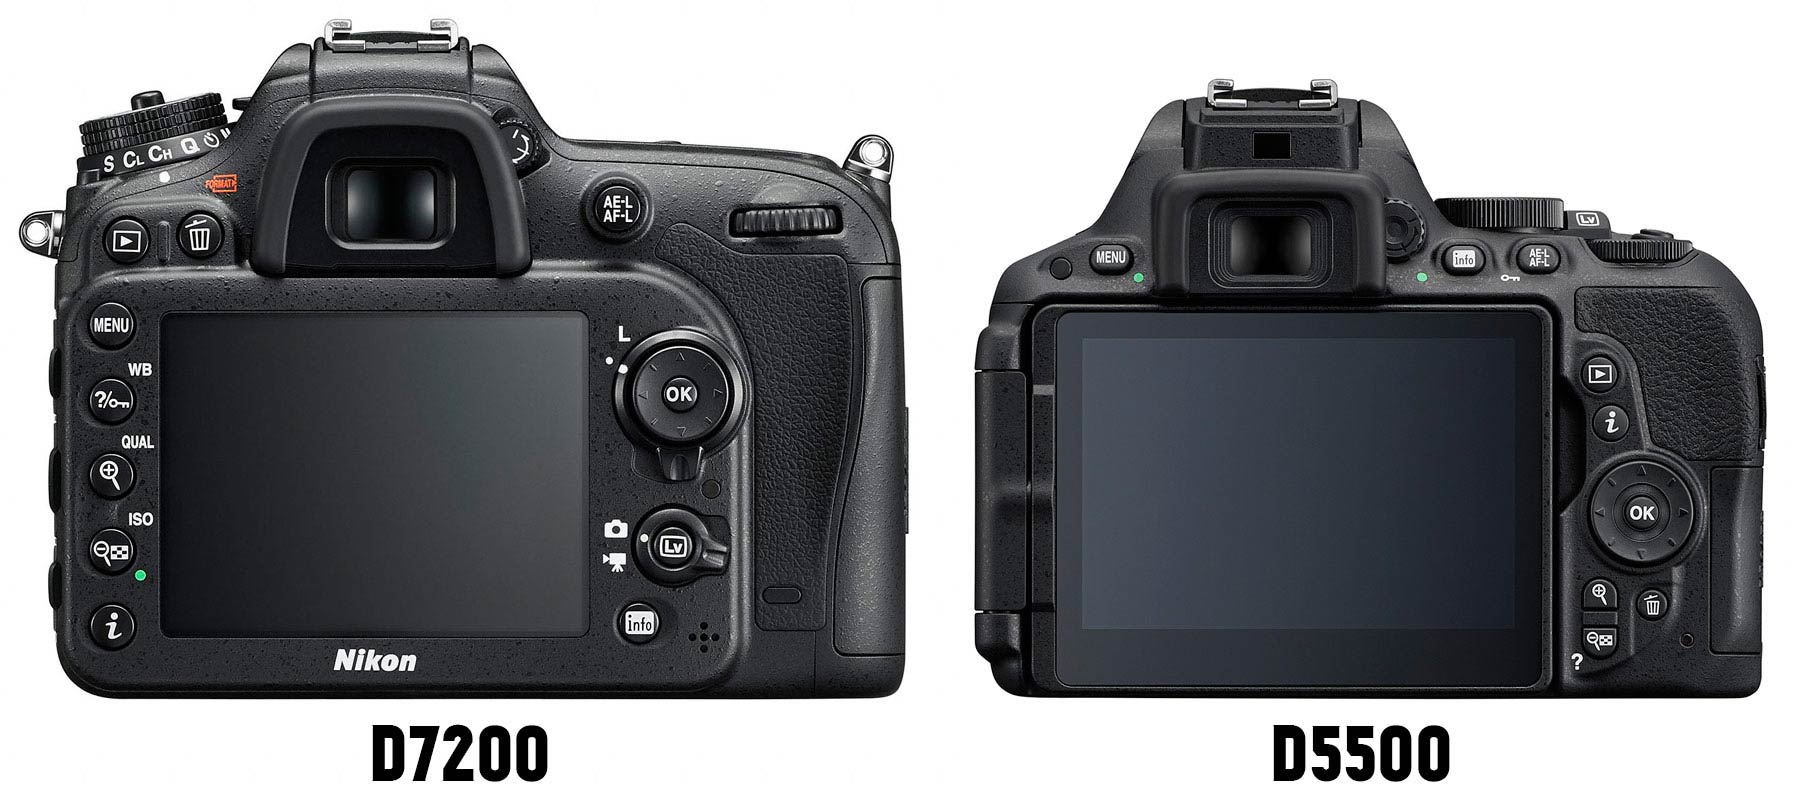 dress up dress up Accuracy Nikon D5500 vs D7200: Which Should You Buy? - Light And Matter